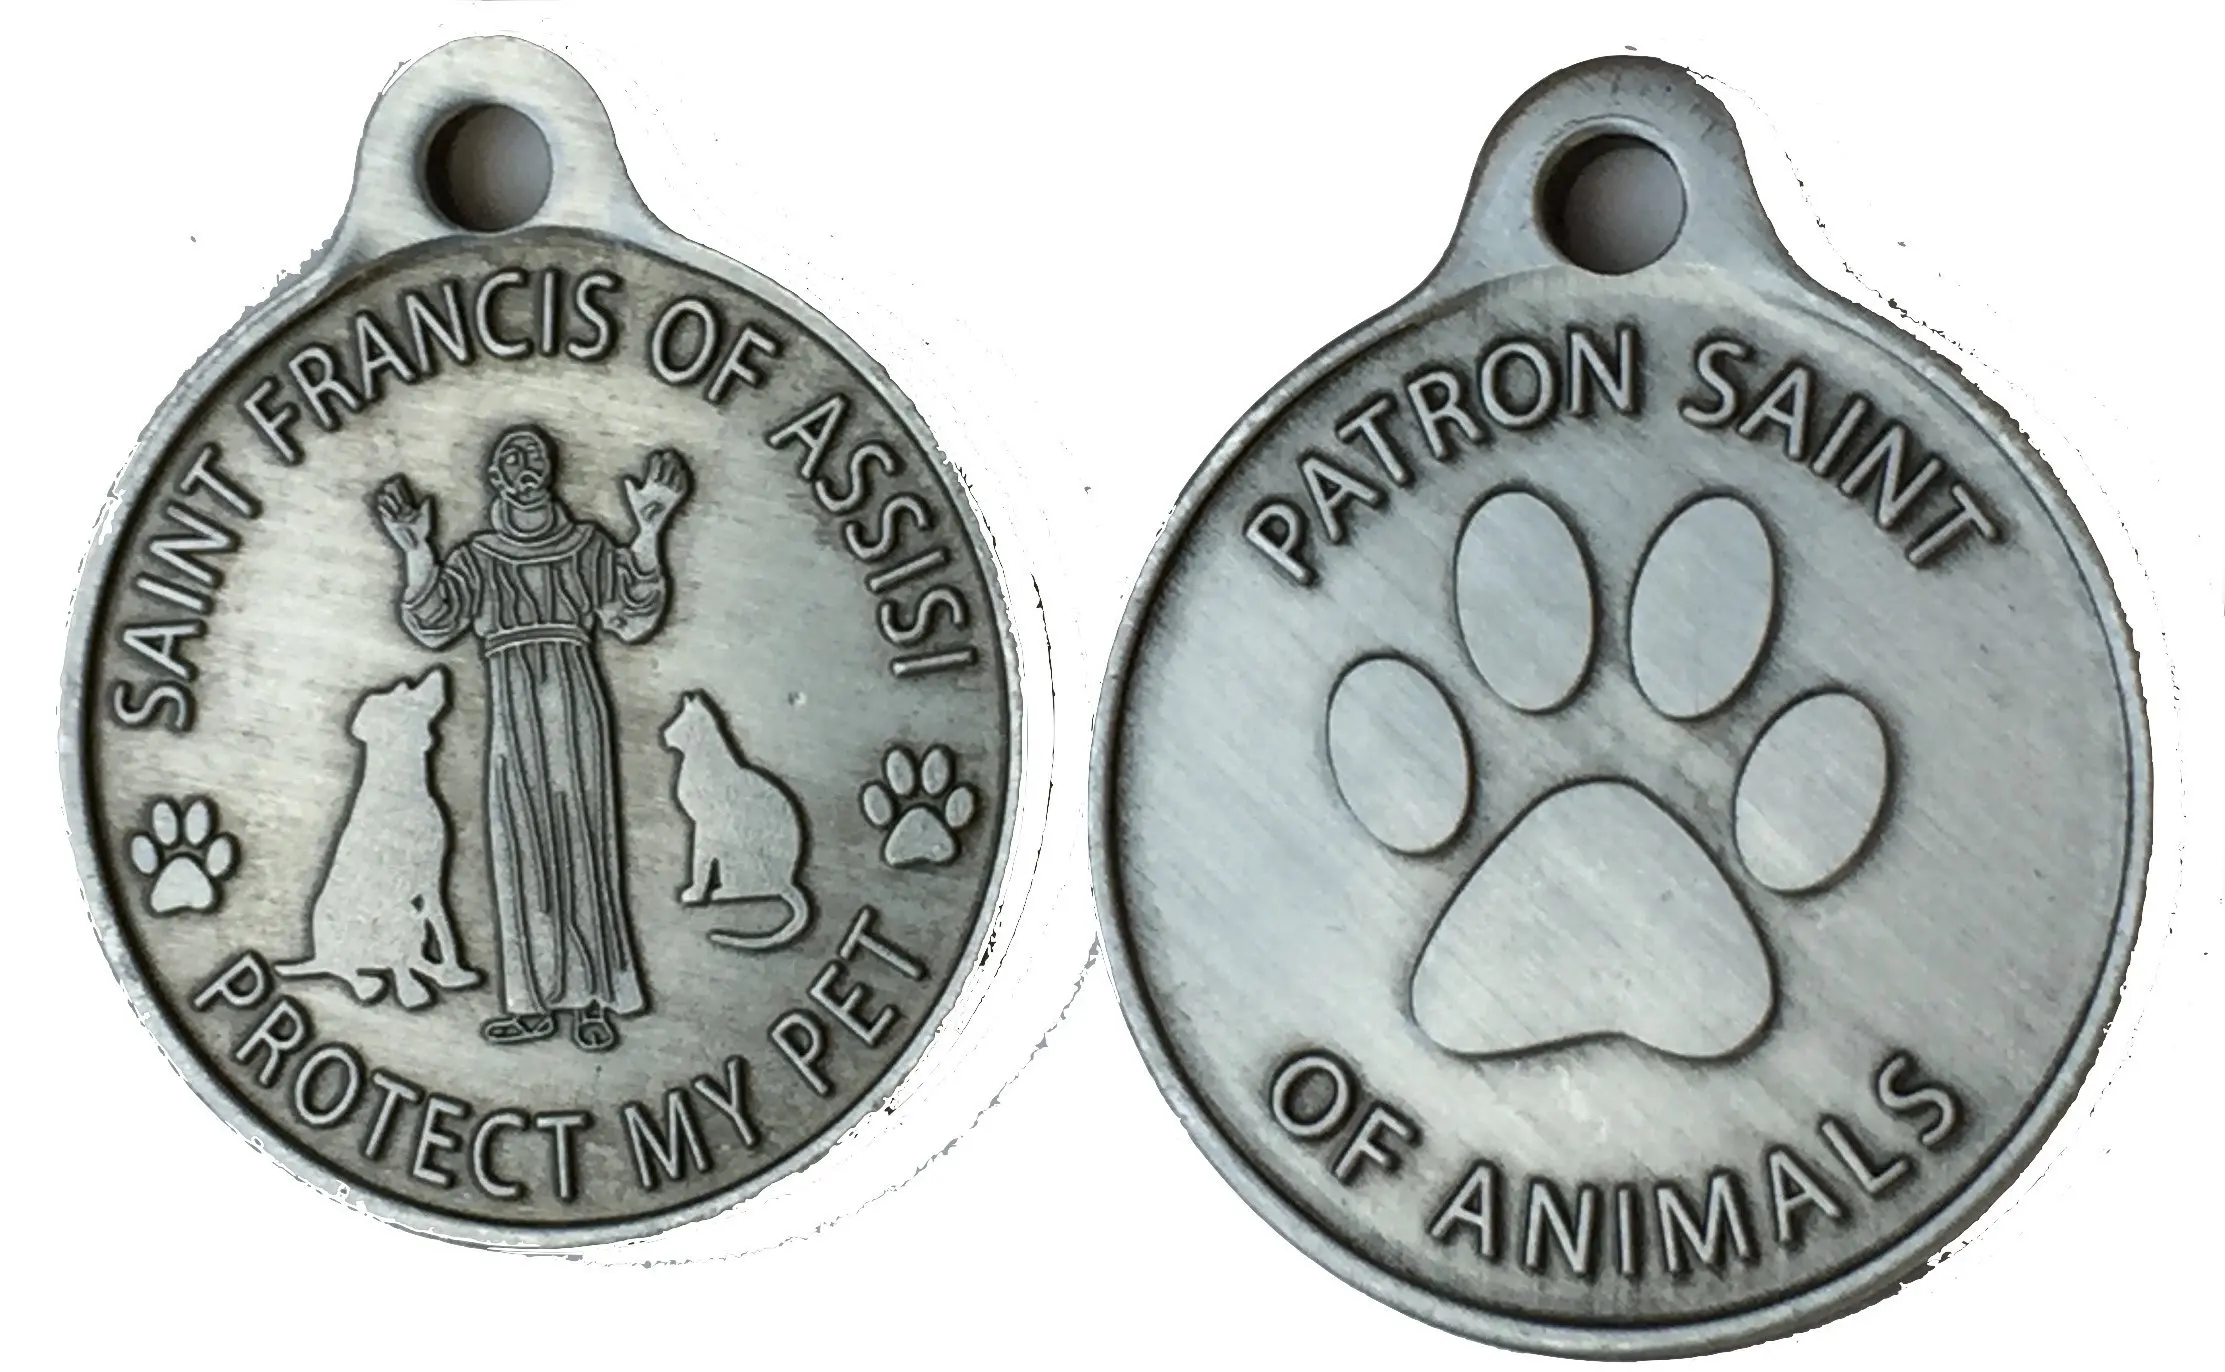 1 Inch Pewter Saint Francis of Assisi Protect My Dog Collar Medal.